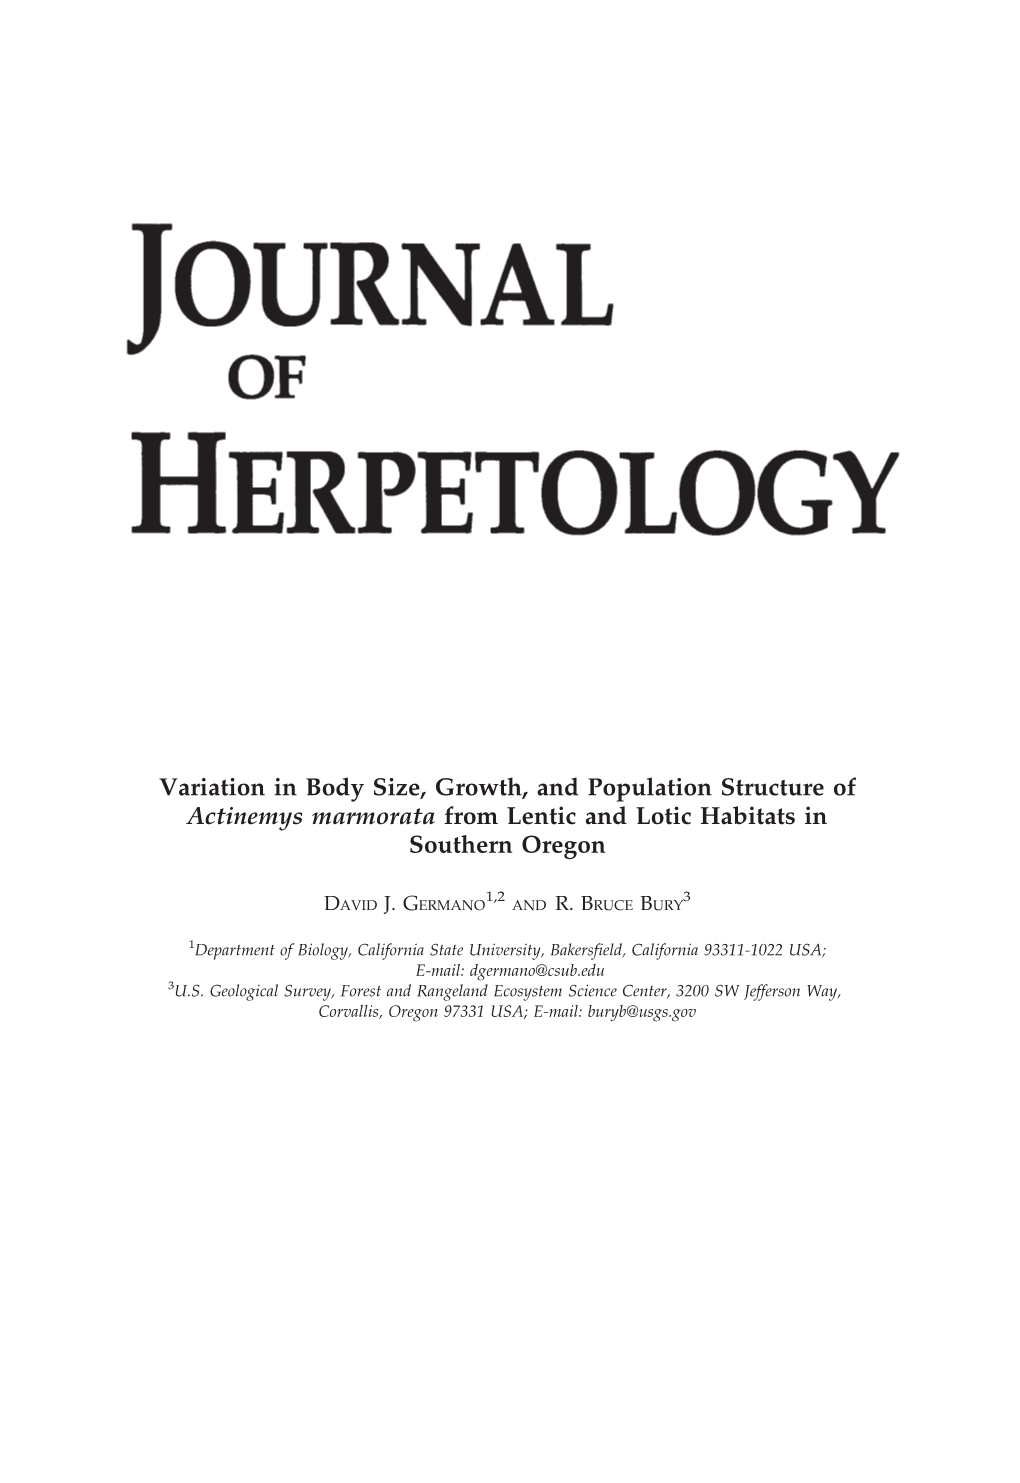 Variation in Body Size, Growth, and Population Structure of Actinemys Marmorata from Lentic and Lotic Habitats in Southern Oregon